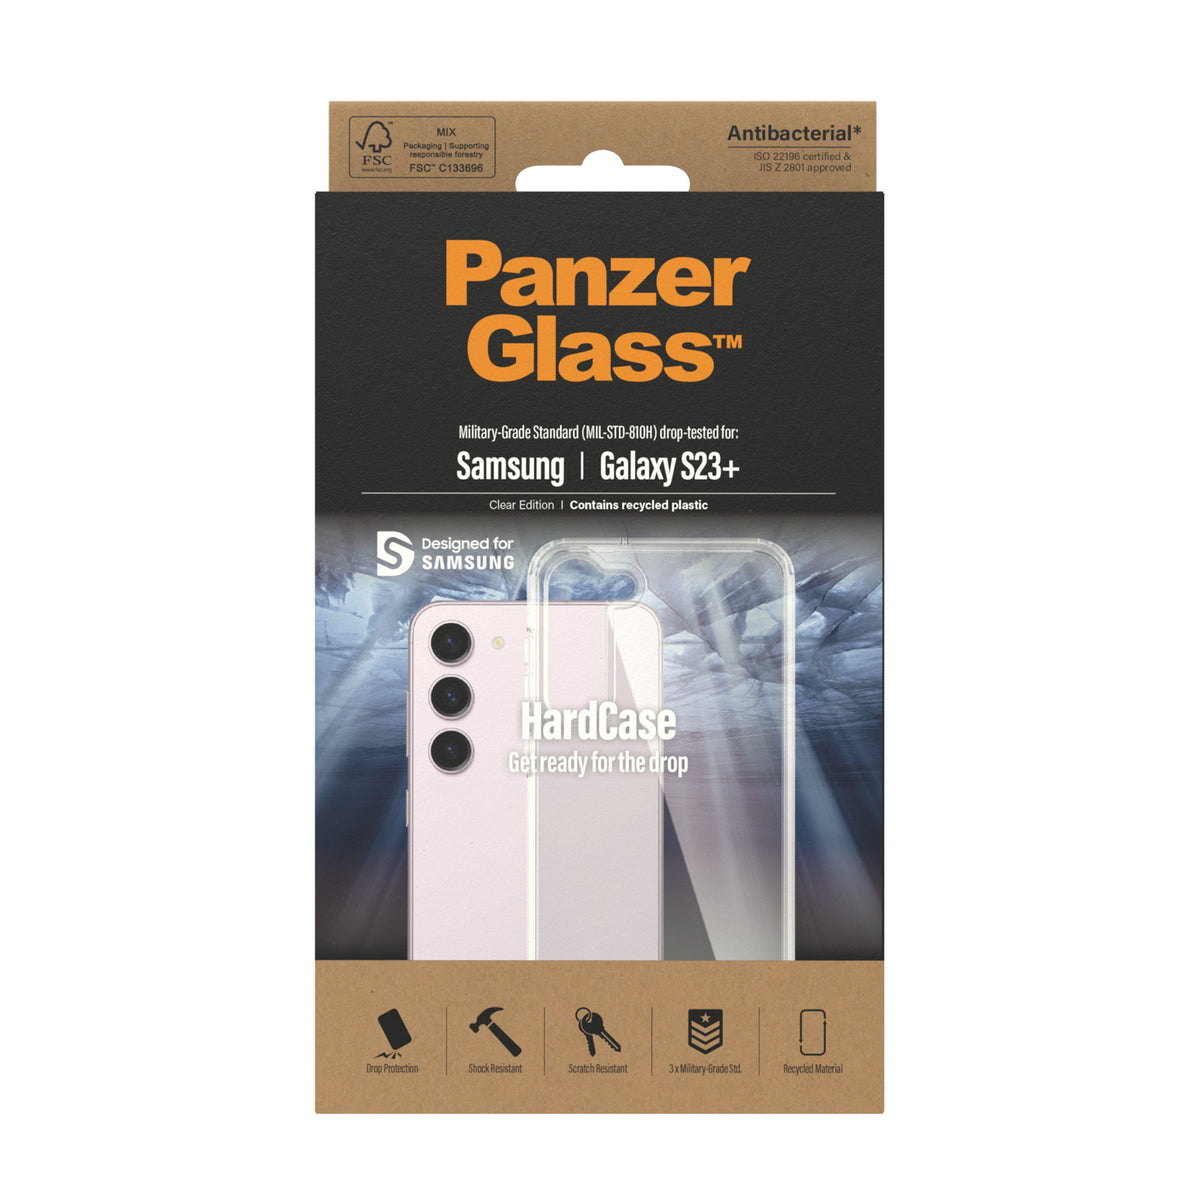 PANZERGLASS HardCase for Samsung Galaxy S23 Plus - Clear